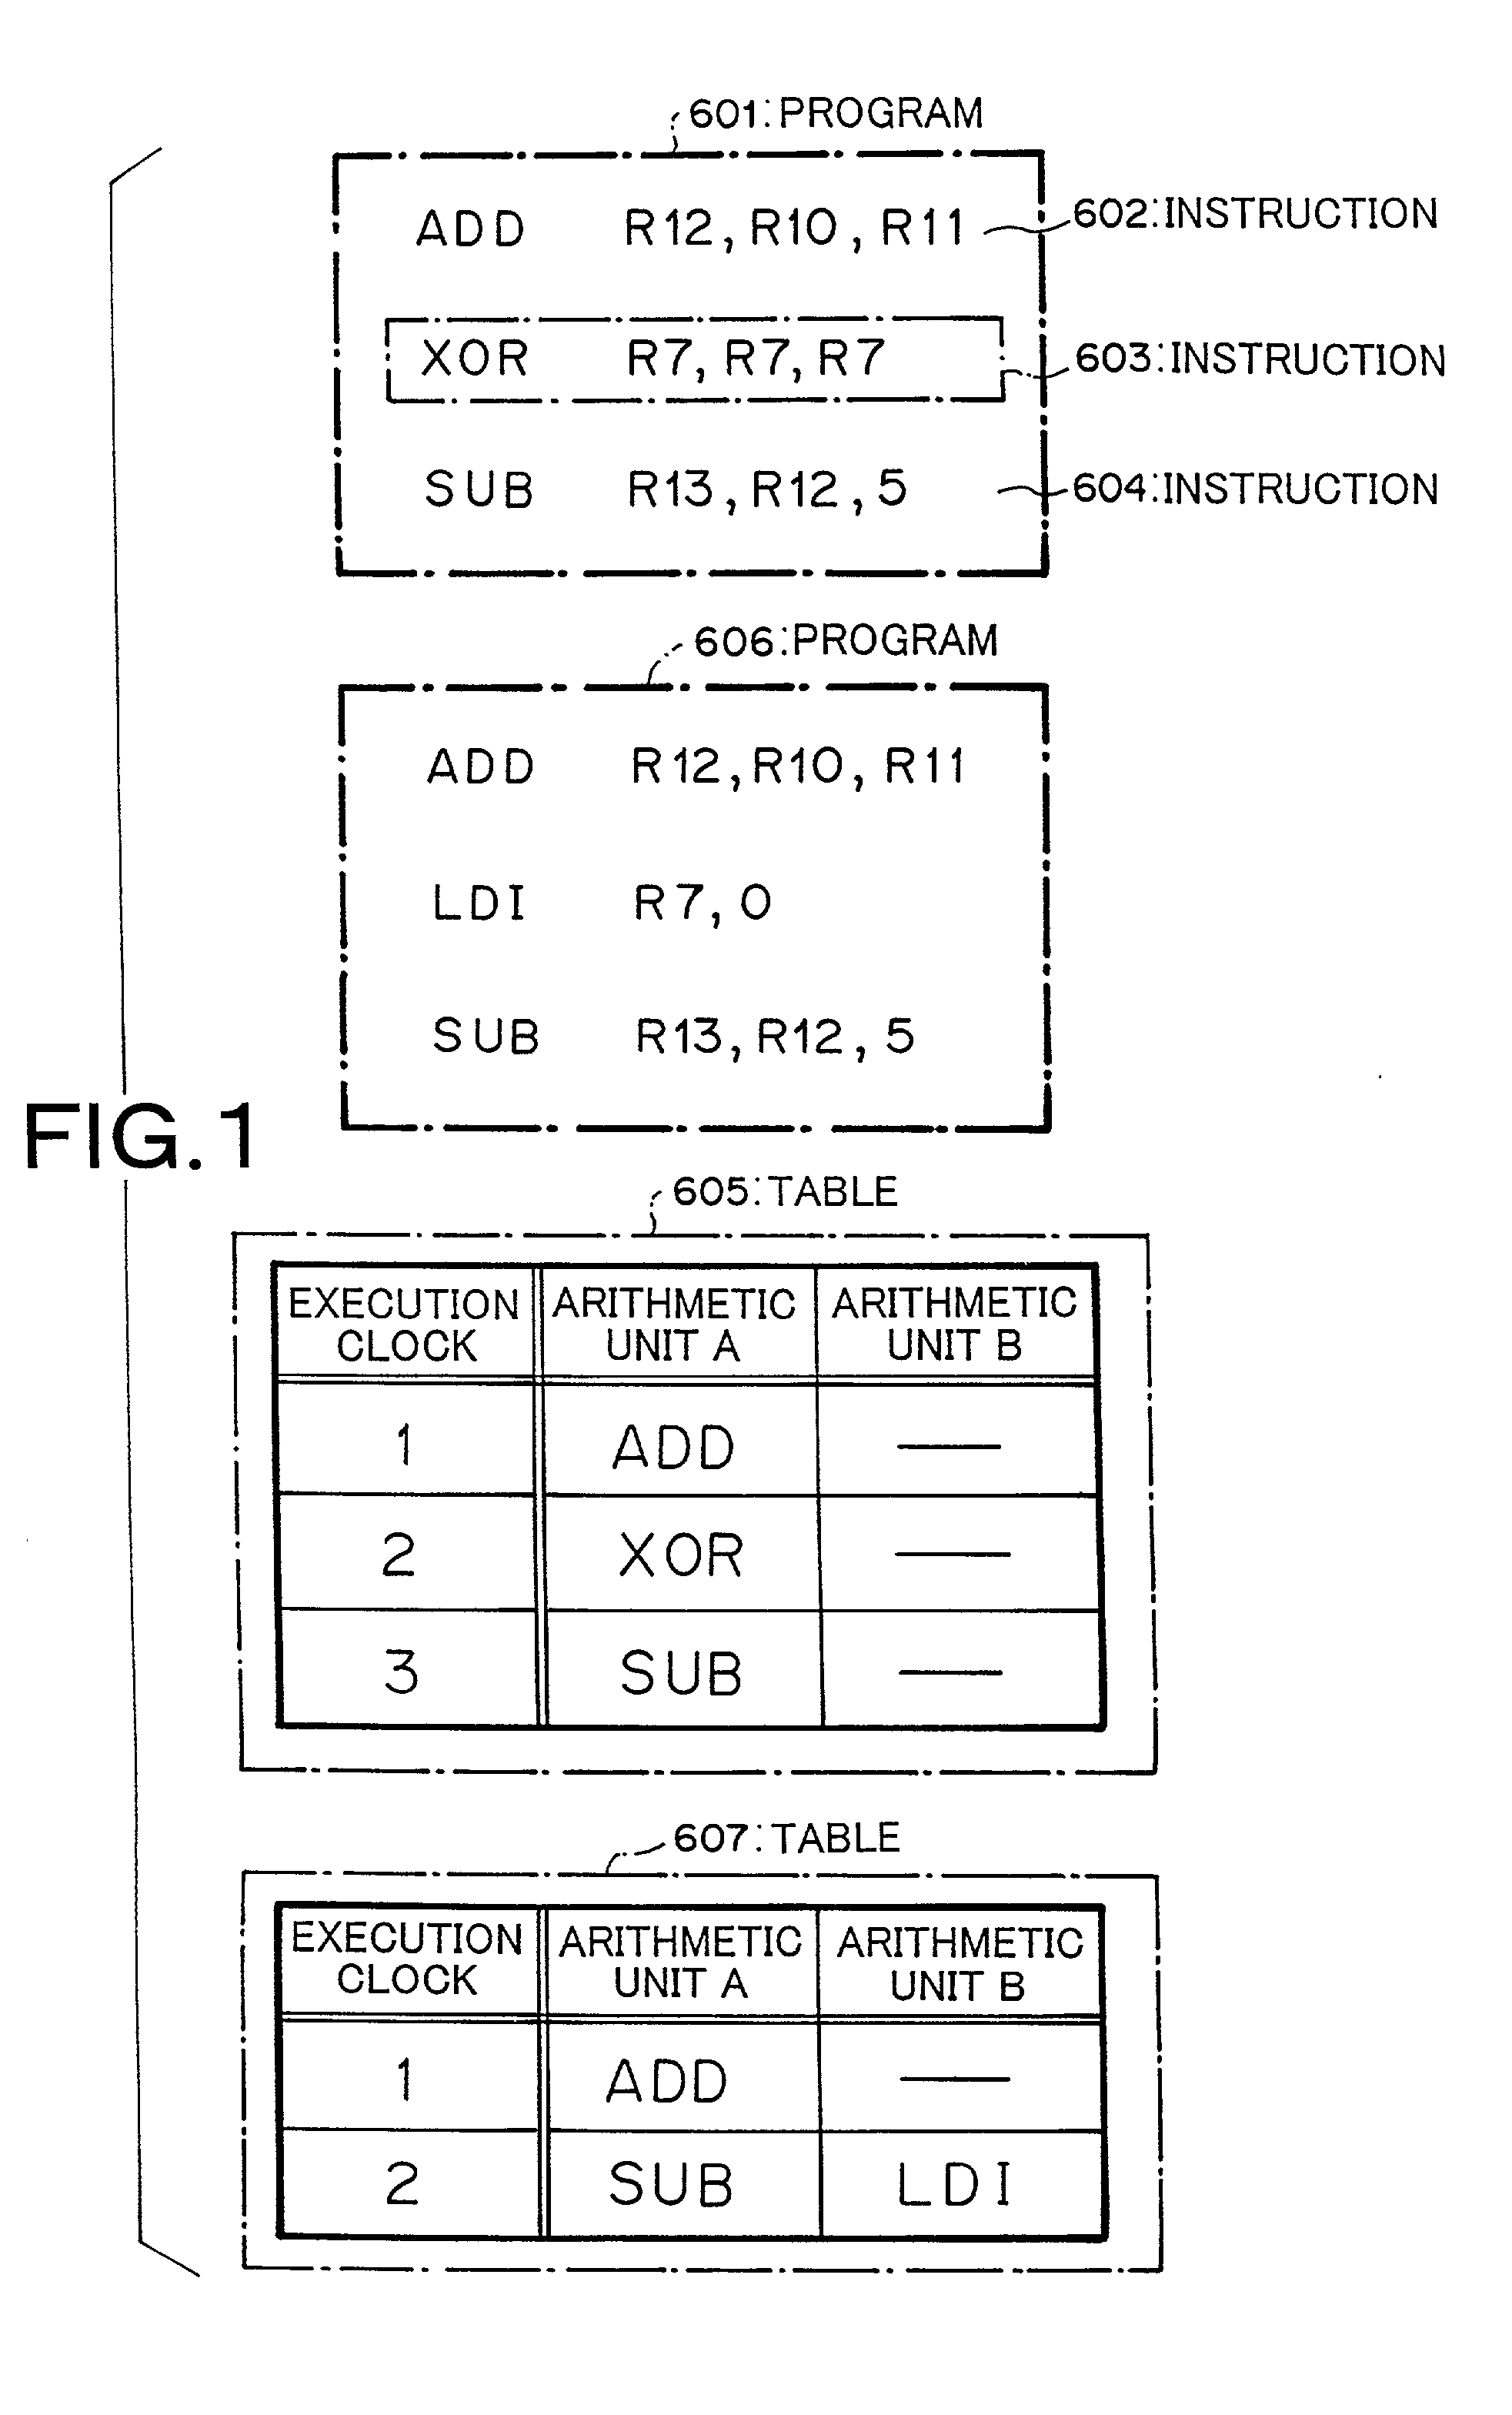 Compiler processing system for generating assembly program codes for a computer comprising a plurality of arithmetic units